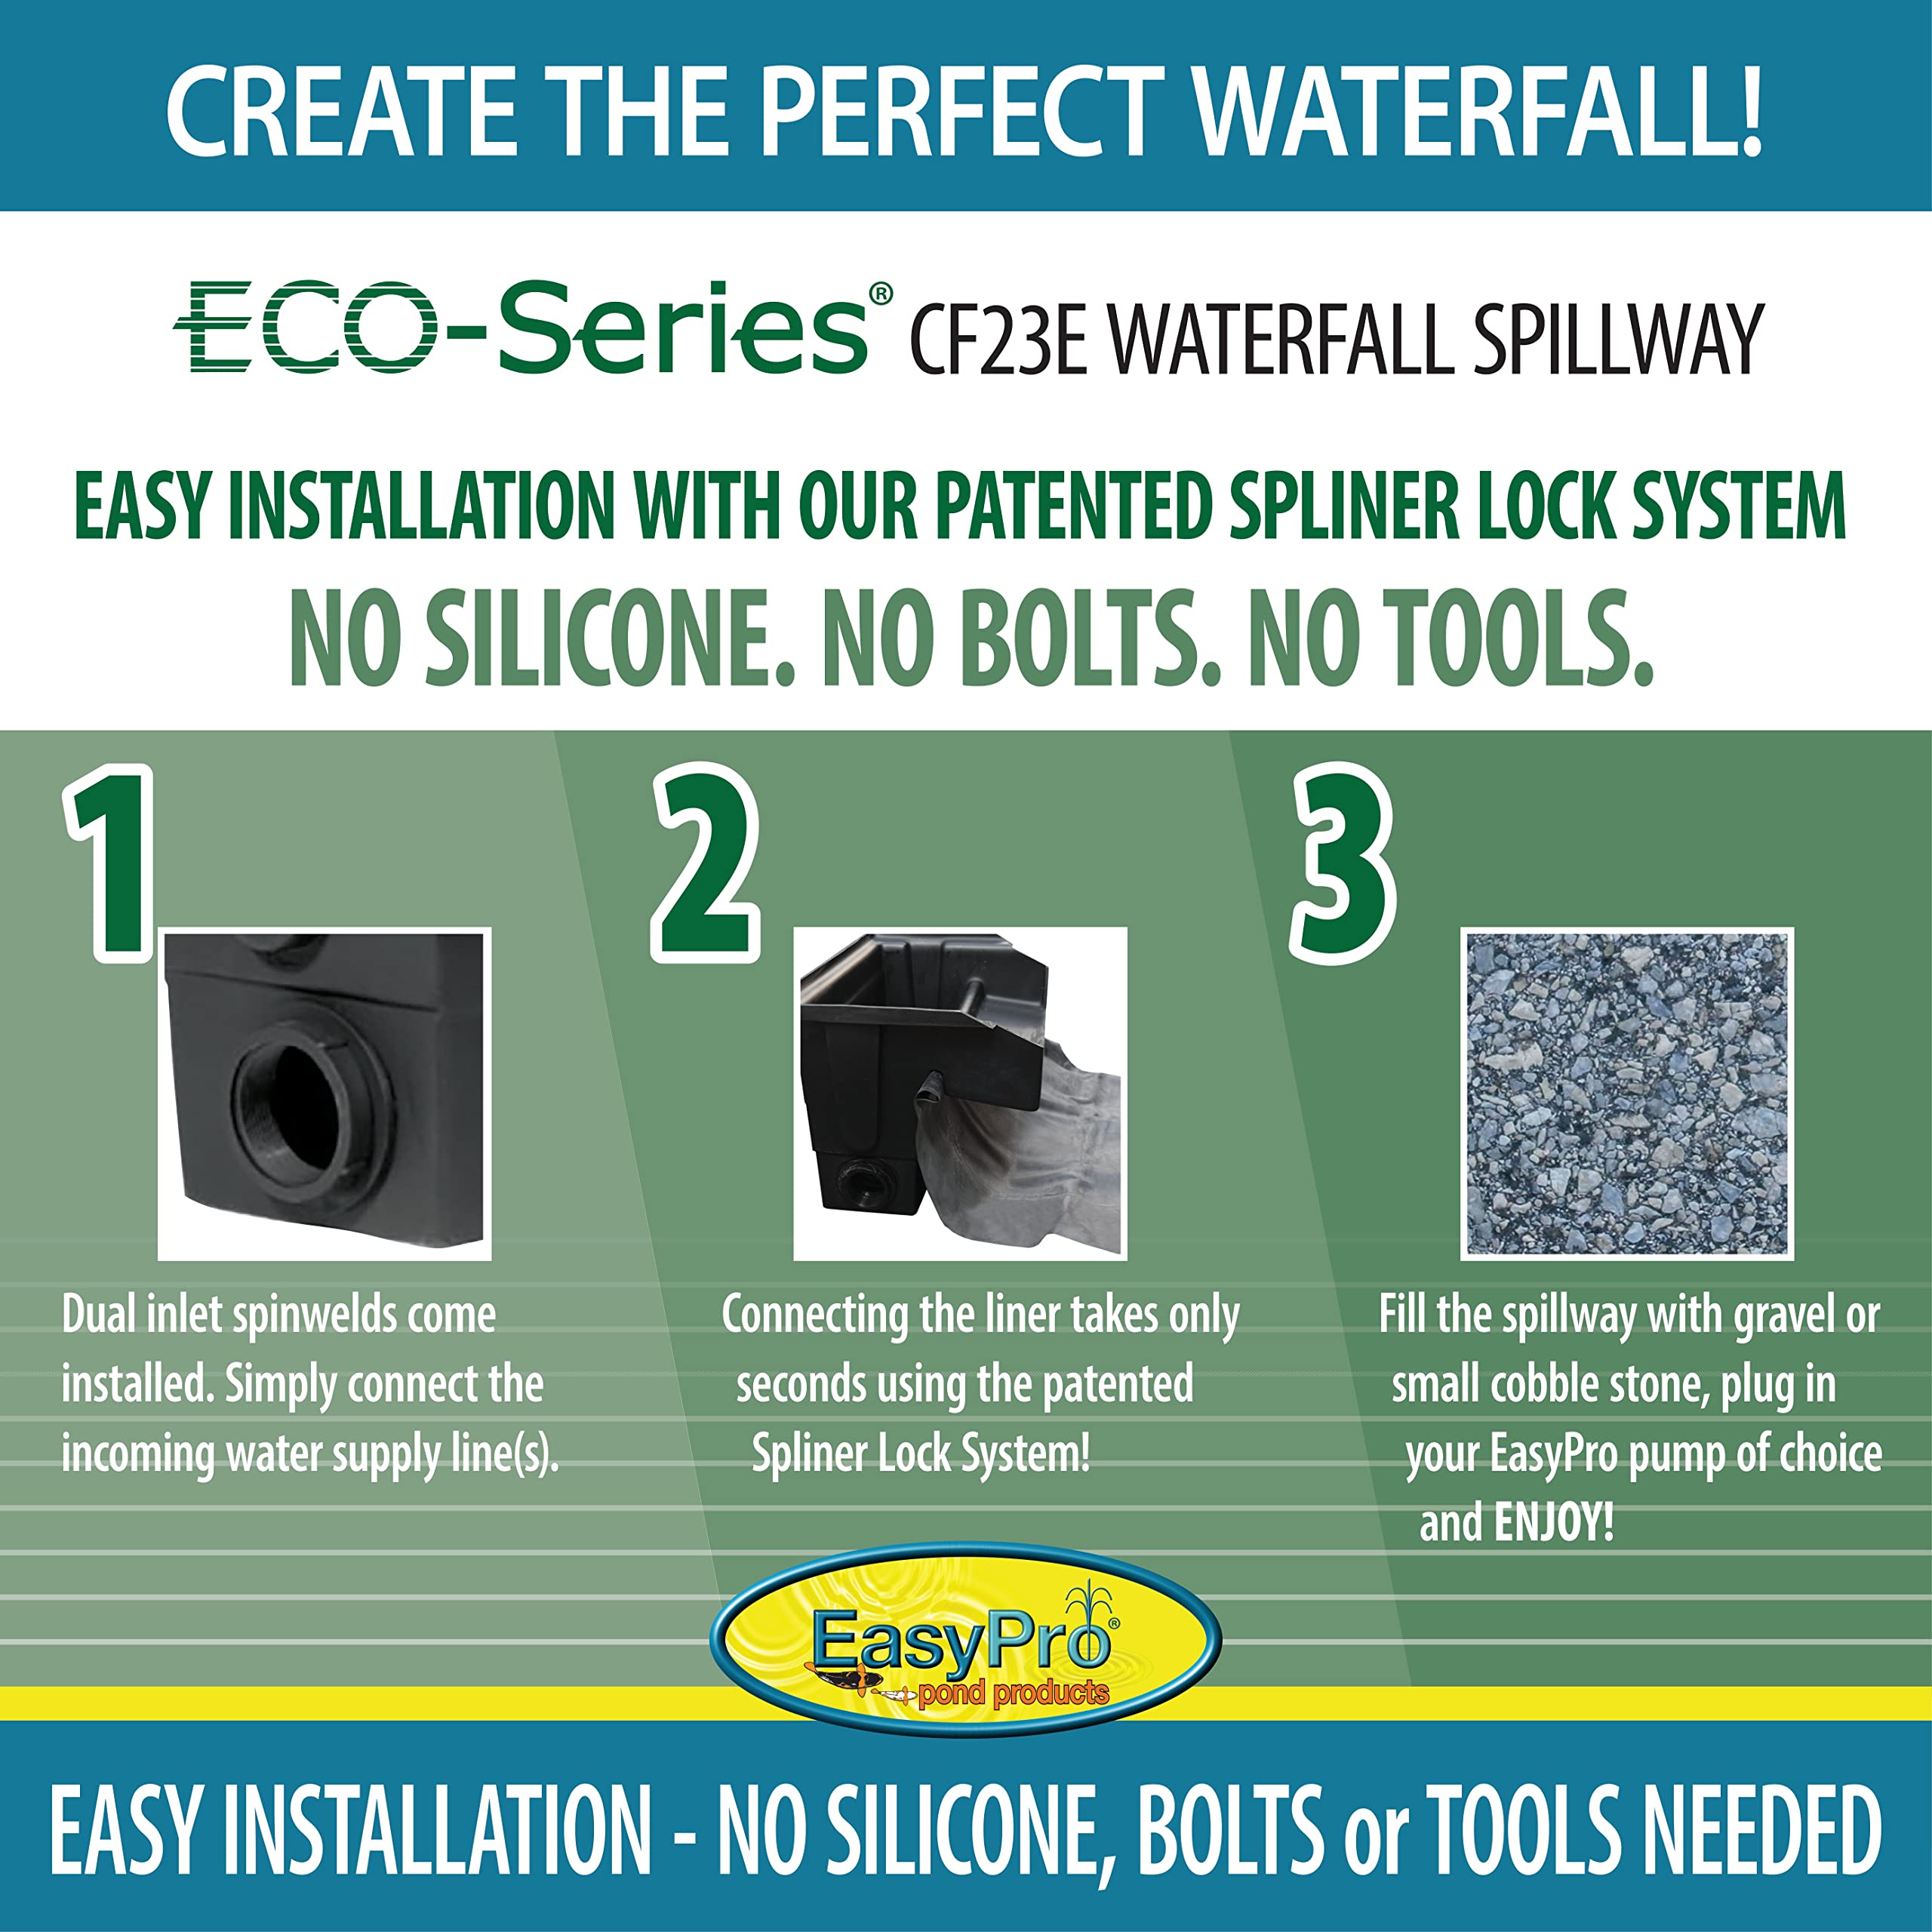 EasyPro Pond Products CF23E Eco-Series 23” Waterfall Spillway is Ideal for Just-A-Falls Water Features. Connect Liner Without Tools. 2-2” Installed Spinweld Inlets. Up to 4500 to 6000 GPH Flow